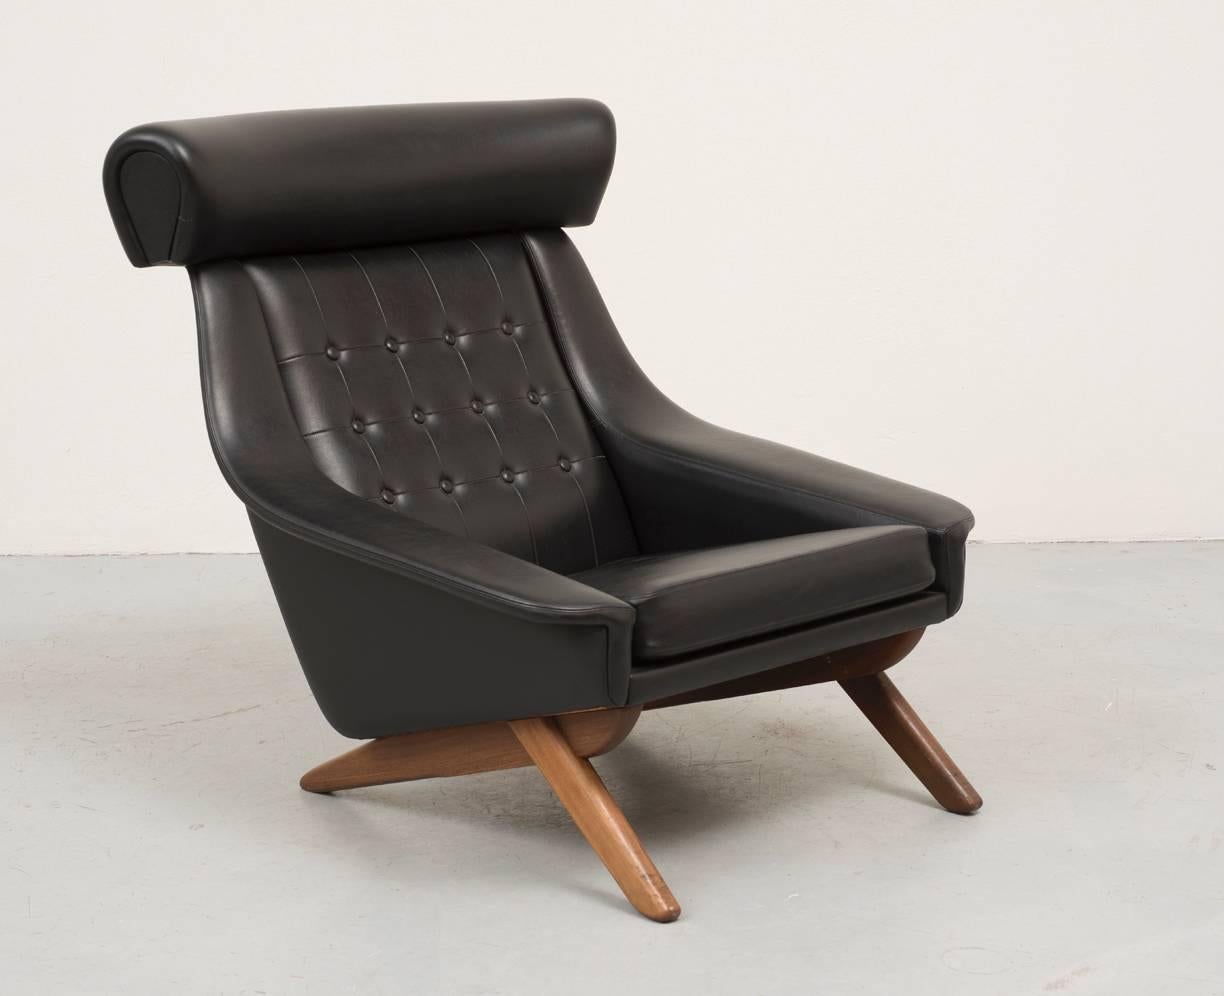 A handsome lounge chair designed by Illum Wikkelsø in original vinyl upholstery with teak frame. Iconic design with scissor legs and button-tufted back. This chair is as comfortable as it is beautiful, circa early 1960s.